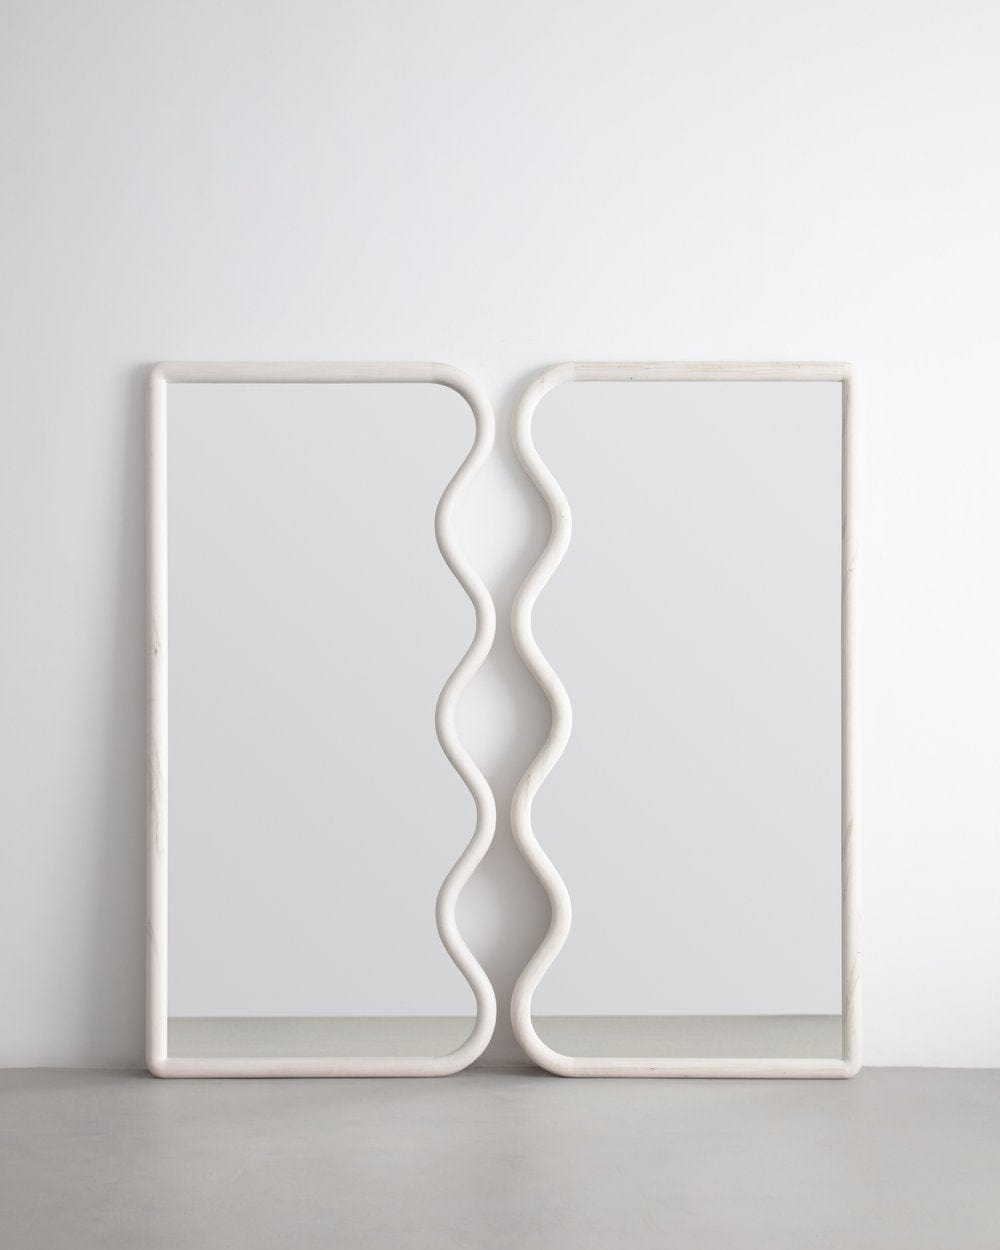 SQUIGGLE MIRROR BLEACHED MAPLE BY CHRISTOPHER MIANO